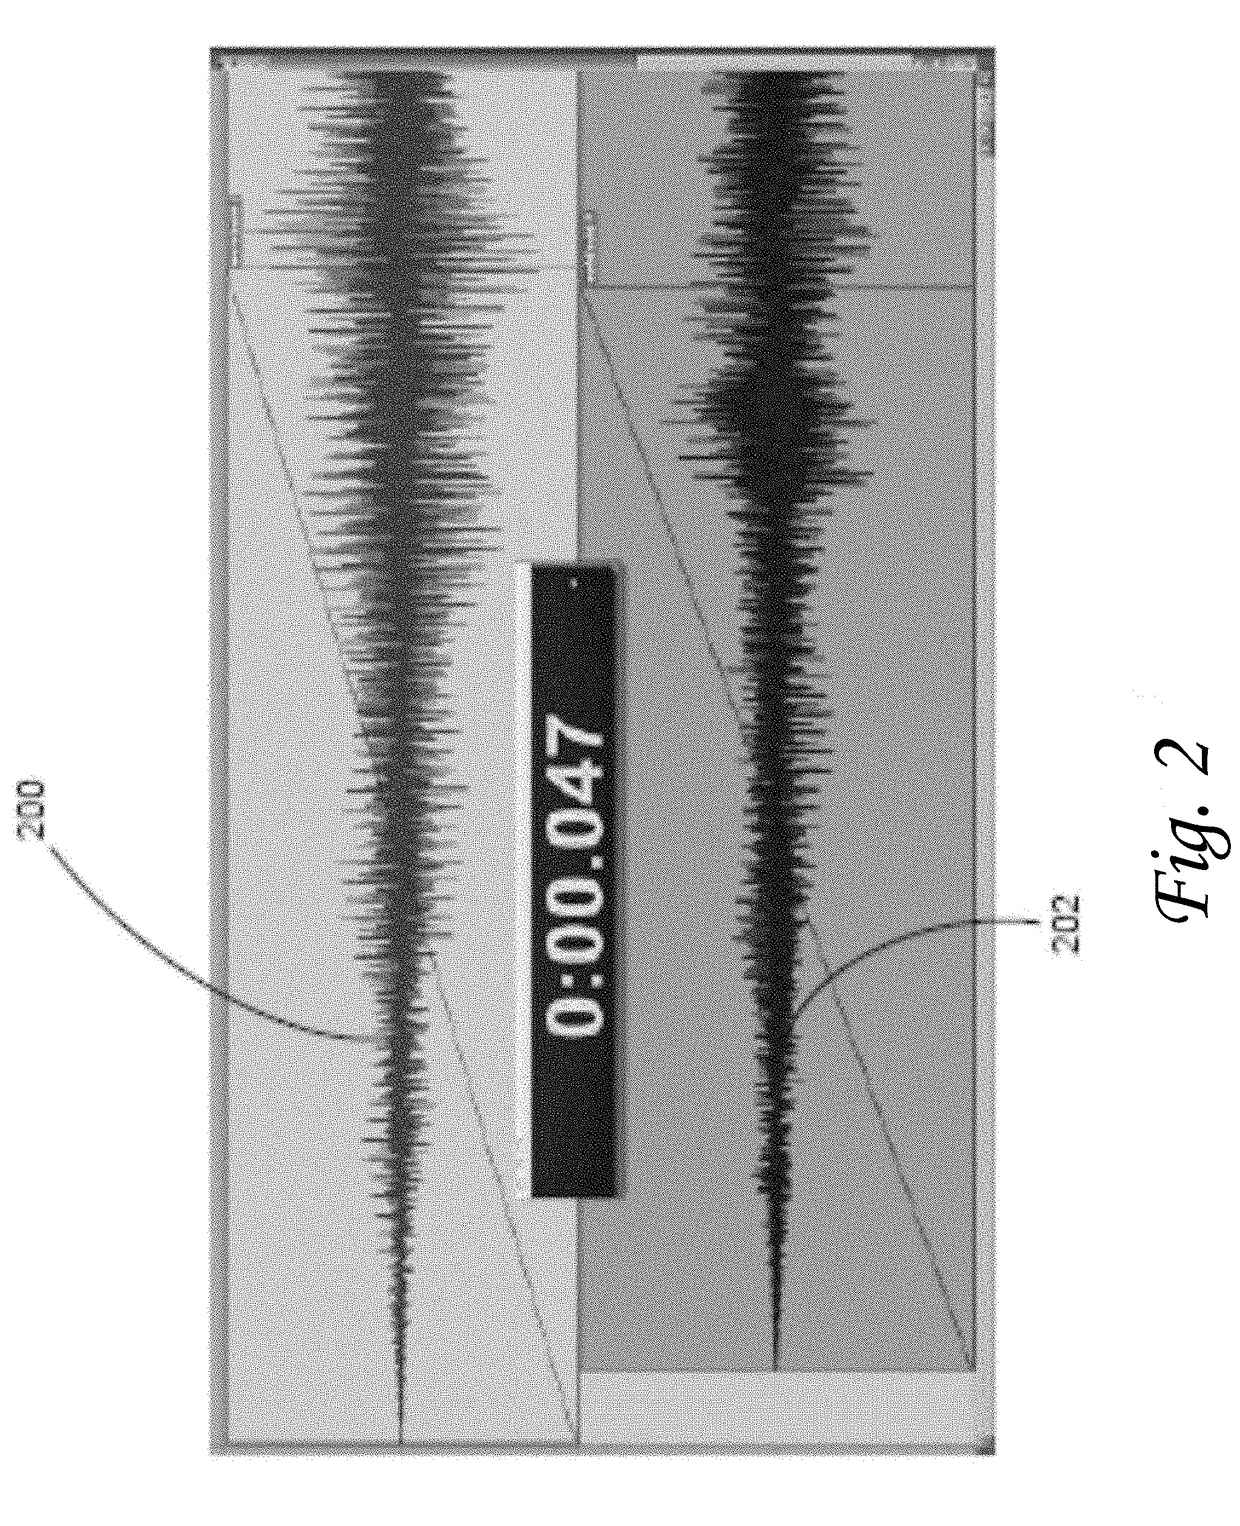 Enhancing audio content for voice isolation and biometric identification